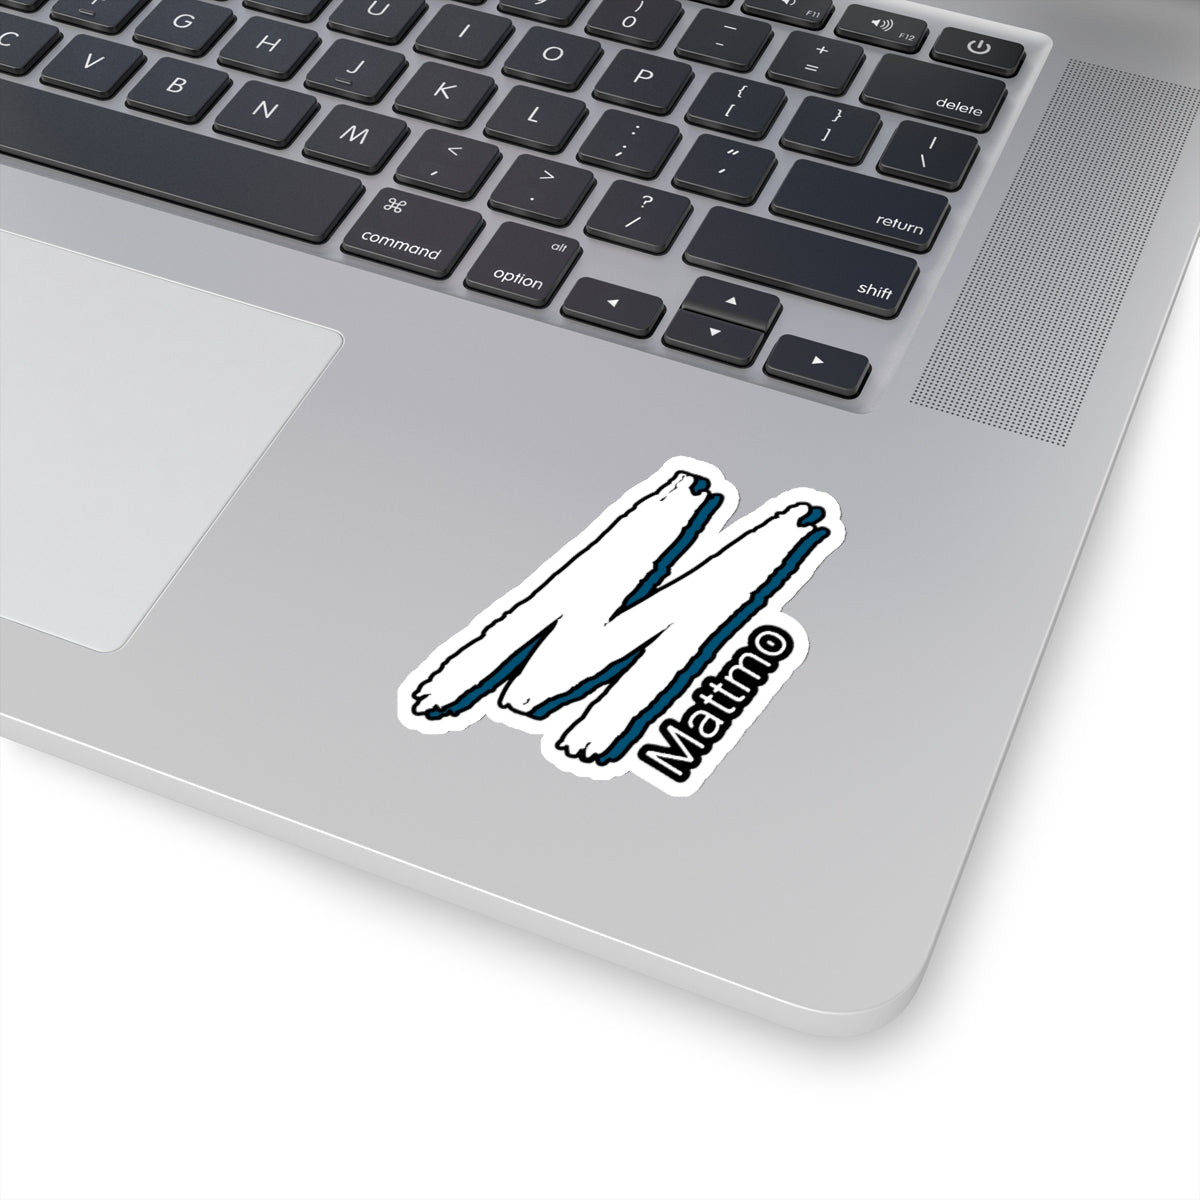 s-mm STICKERS